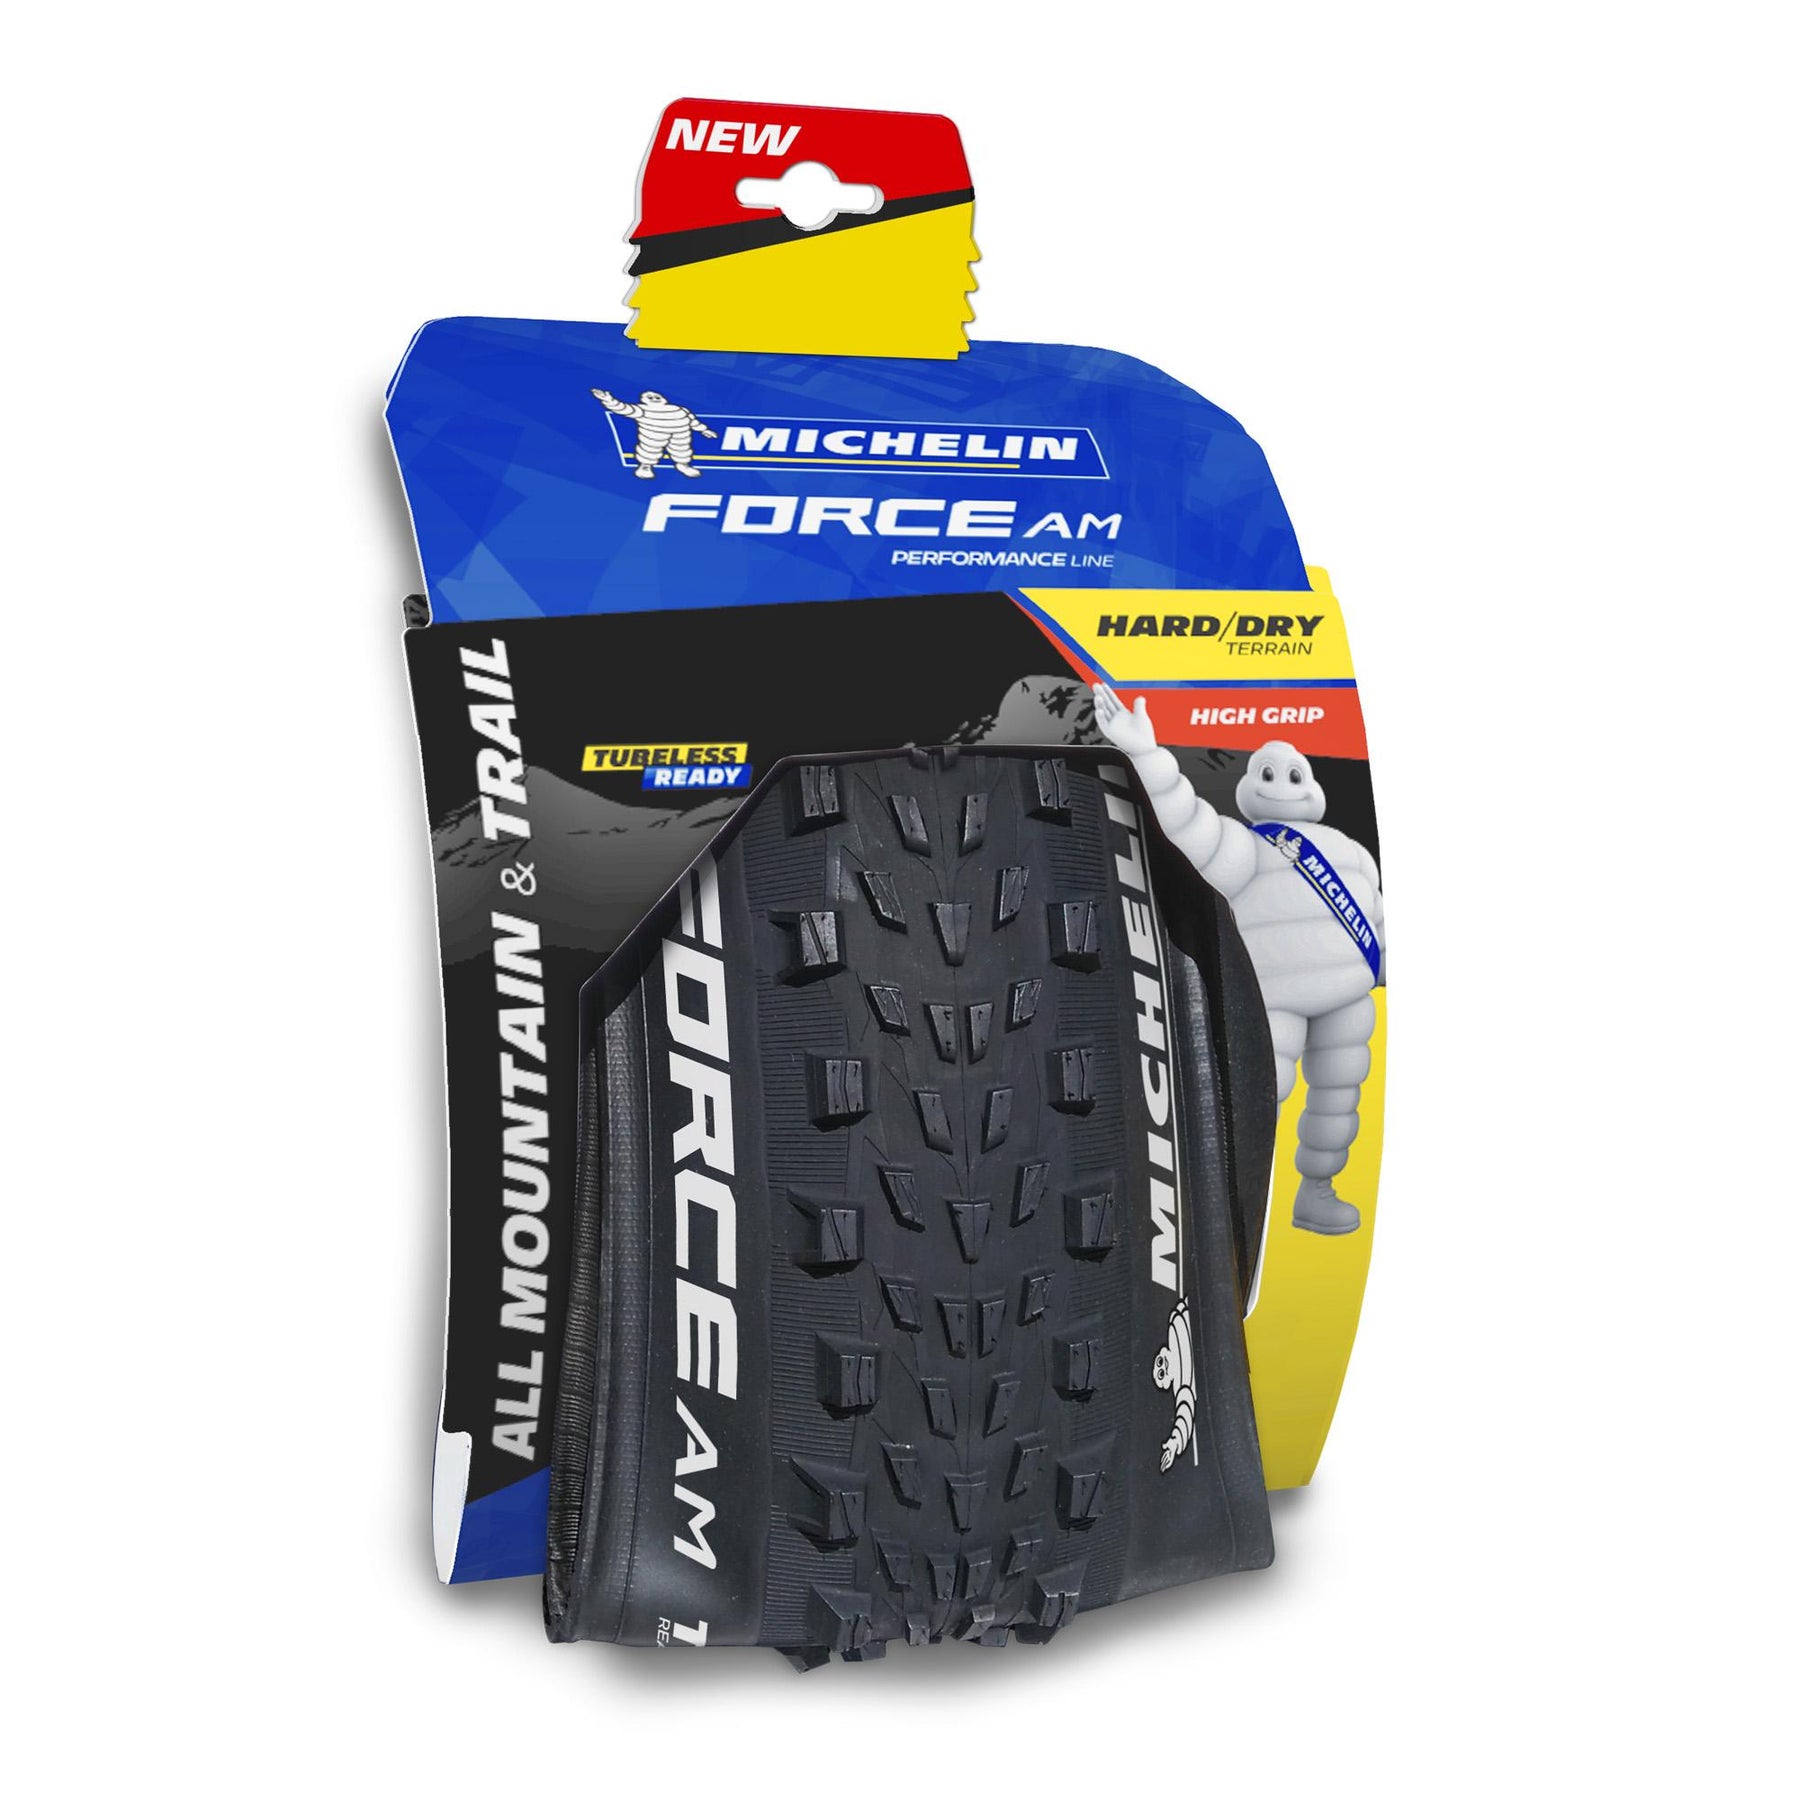 Michelin Force AM Performance Line MTB Tyre